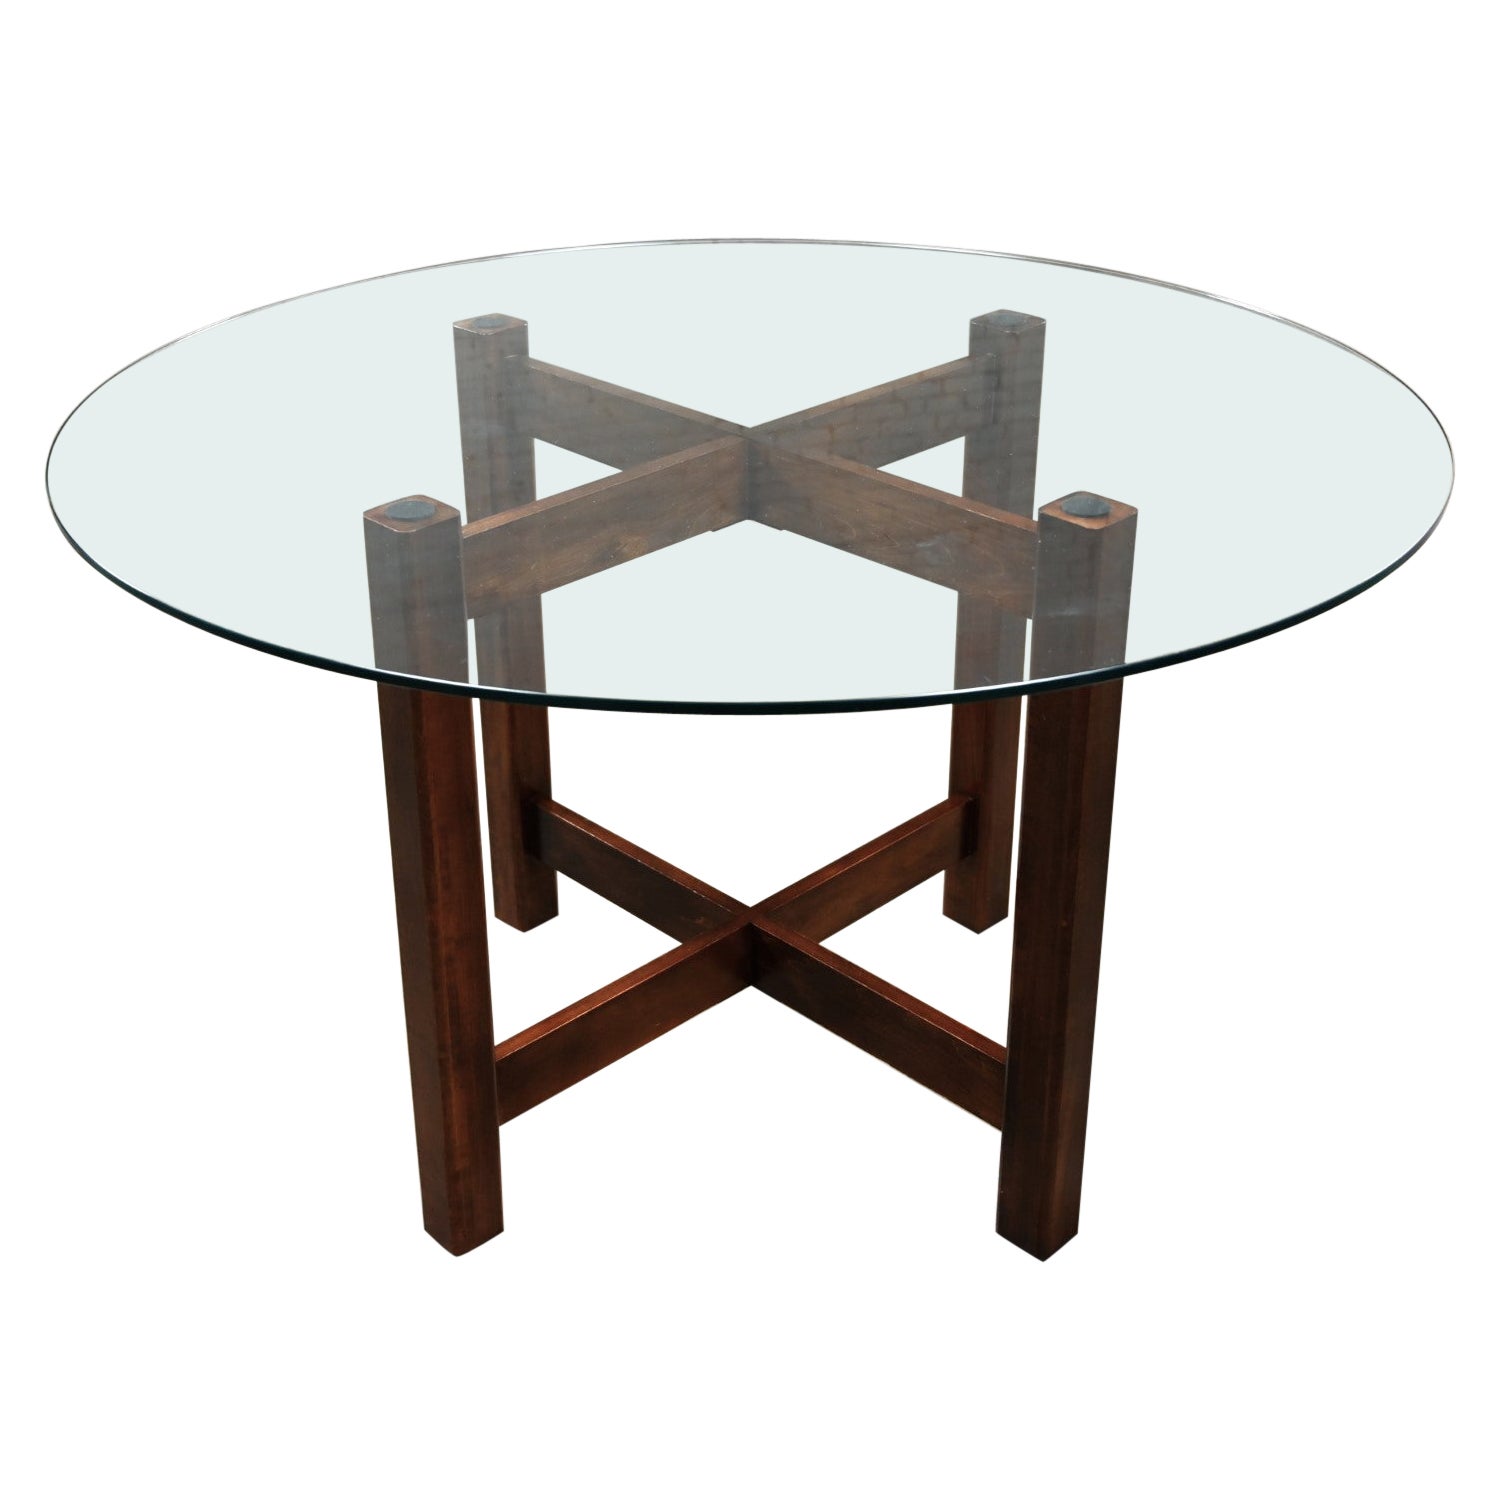 Late 20th Century Modern Walnut X-Base Dining Room Table Round Tempered Glass  For Sale